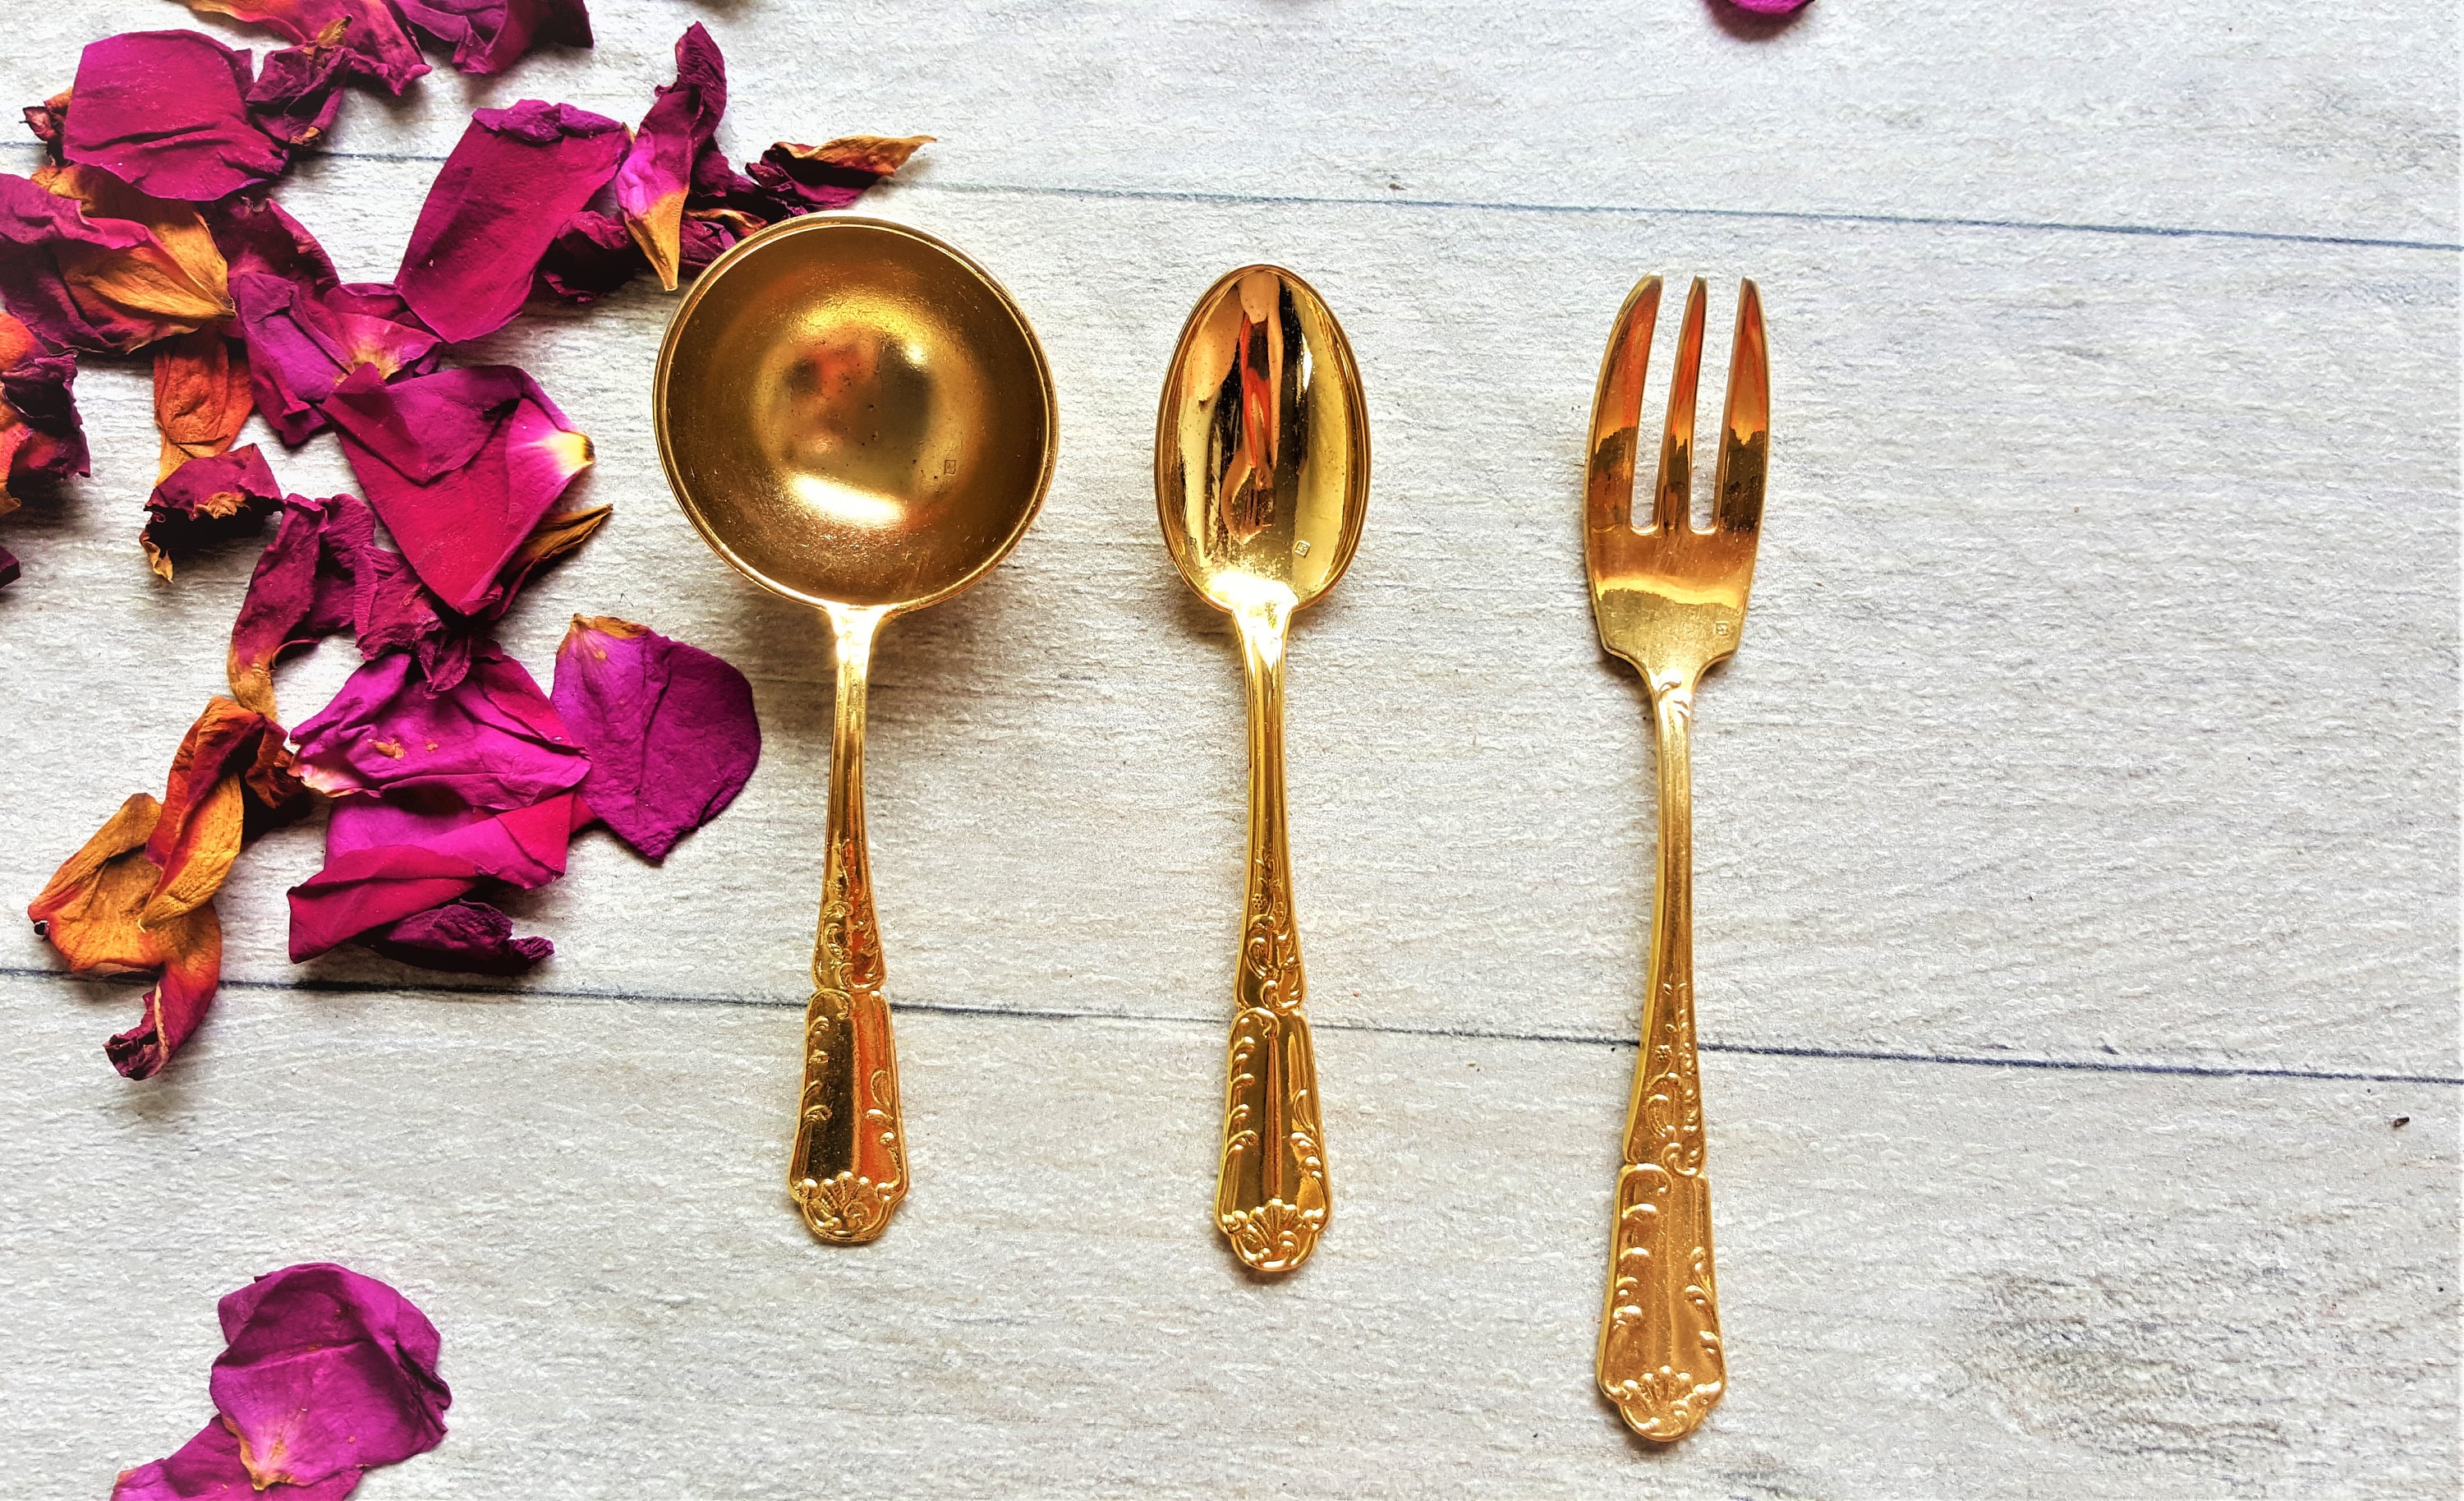 French Jh Gold Plated Dessert Serving Spoons & Forks For 10 Persones/Ice Cream-Mousse Server/Jh Orna